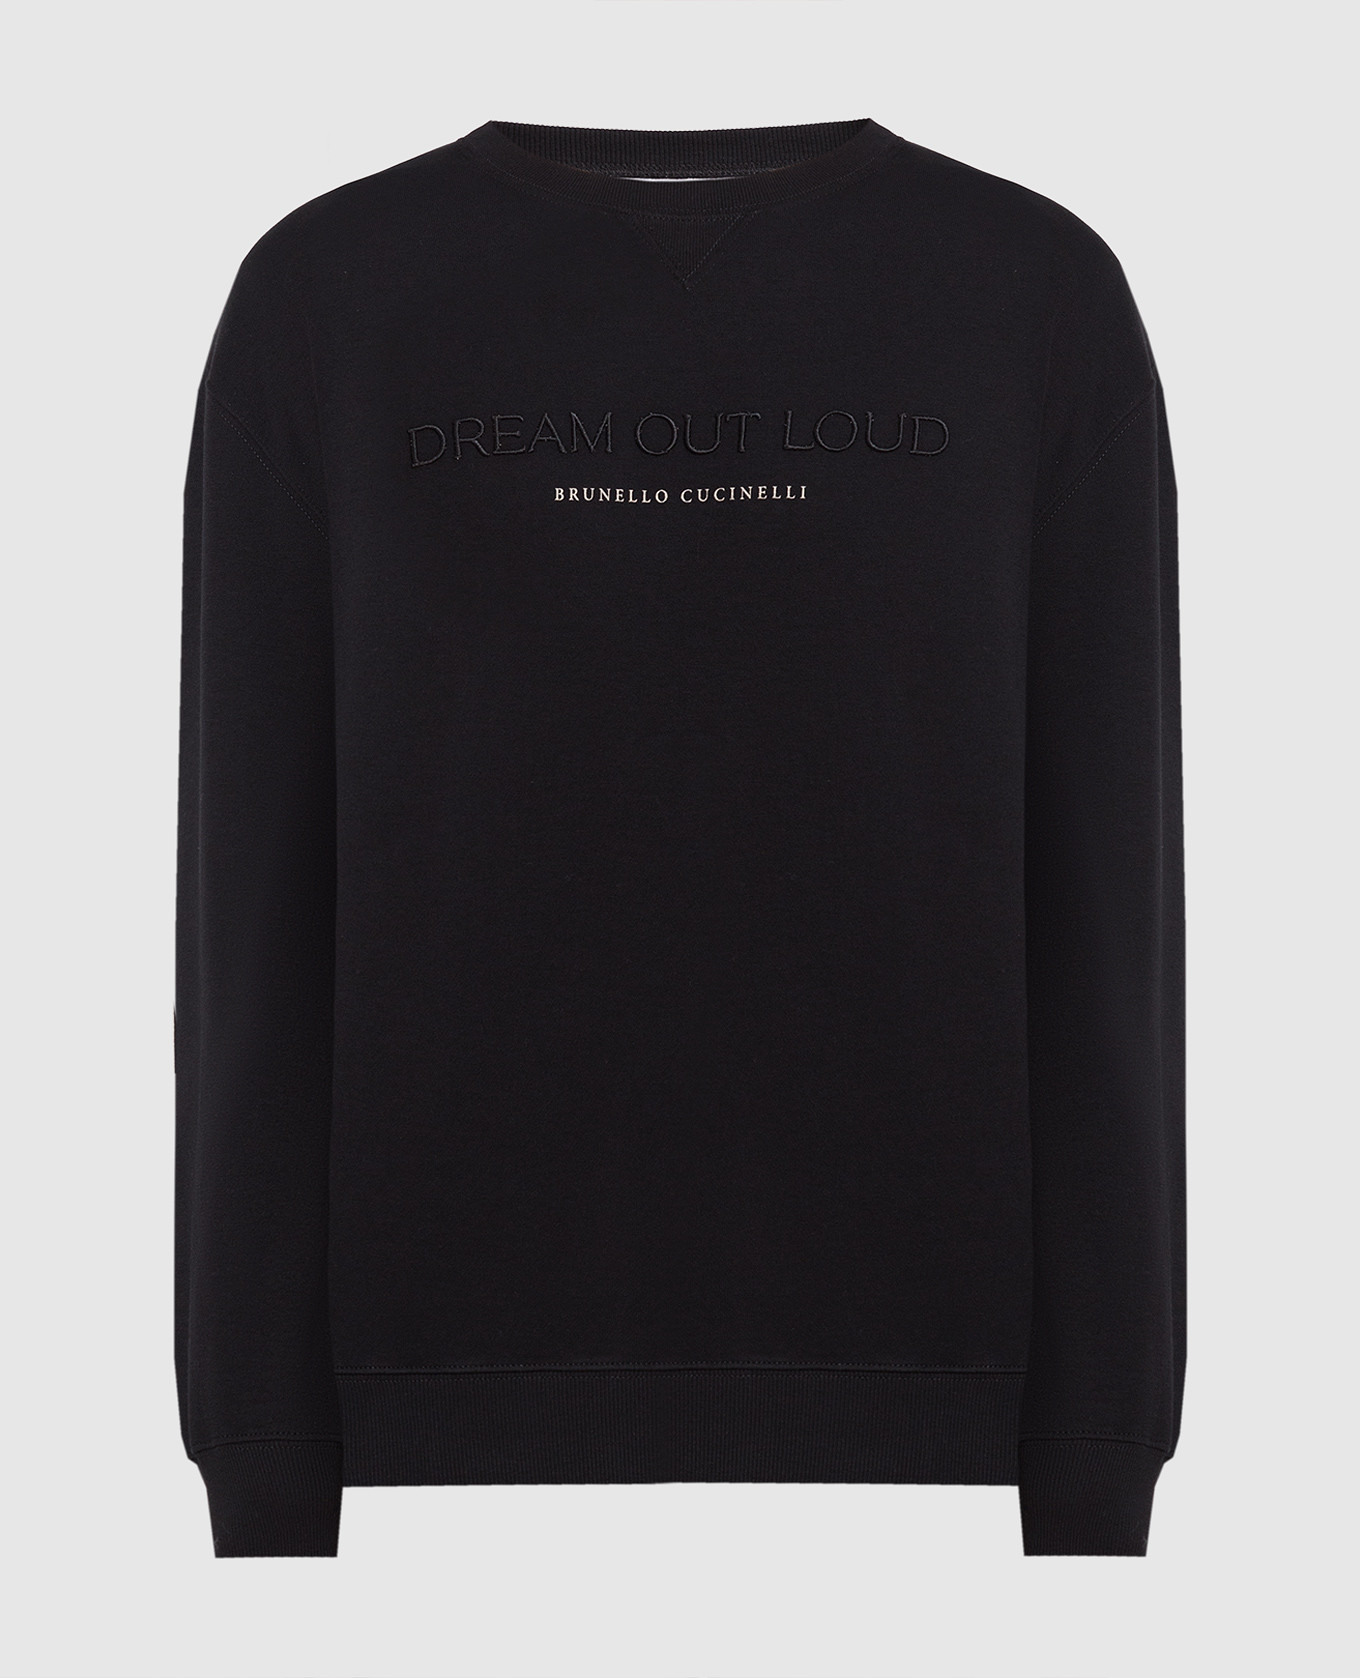 Black sweatshirt with Dream out loud embroidery